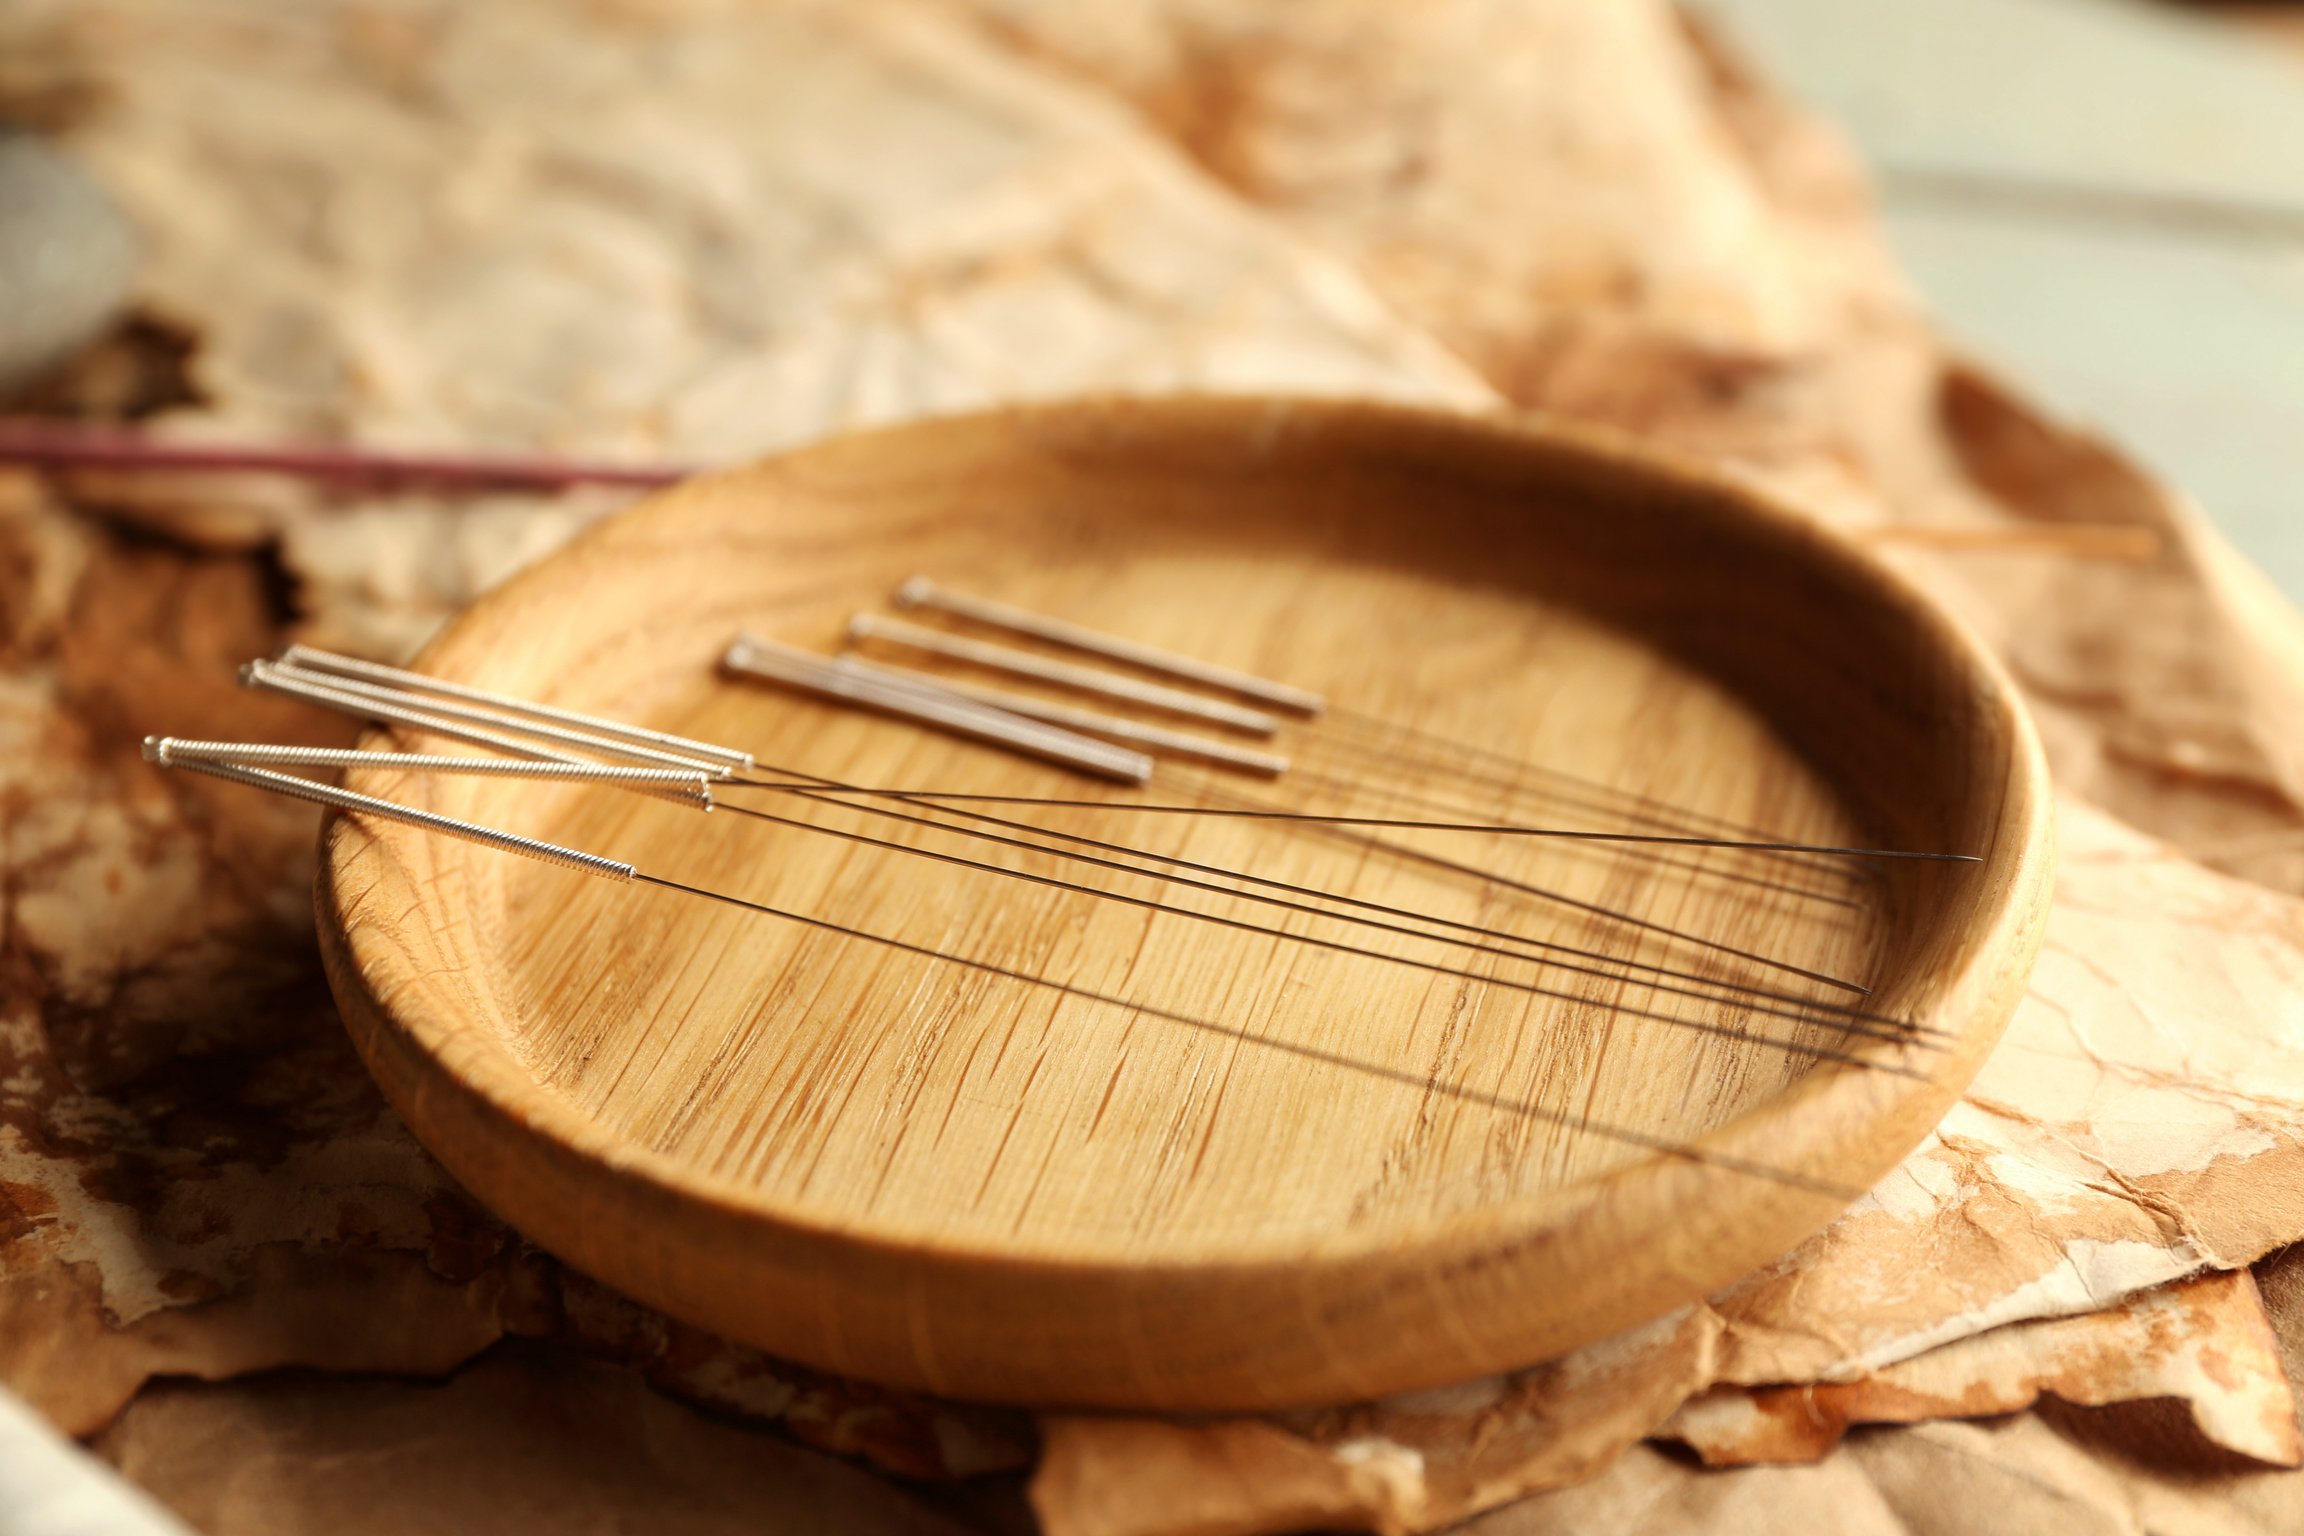 Acupuncture Needles on Wooden Table